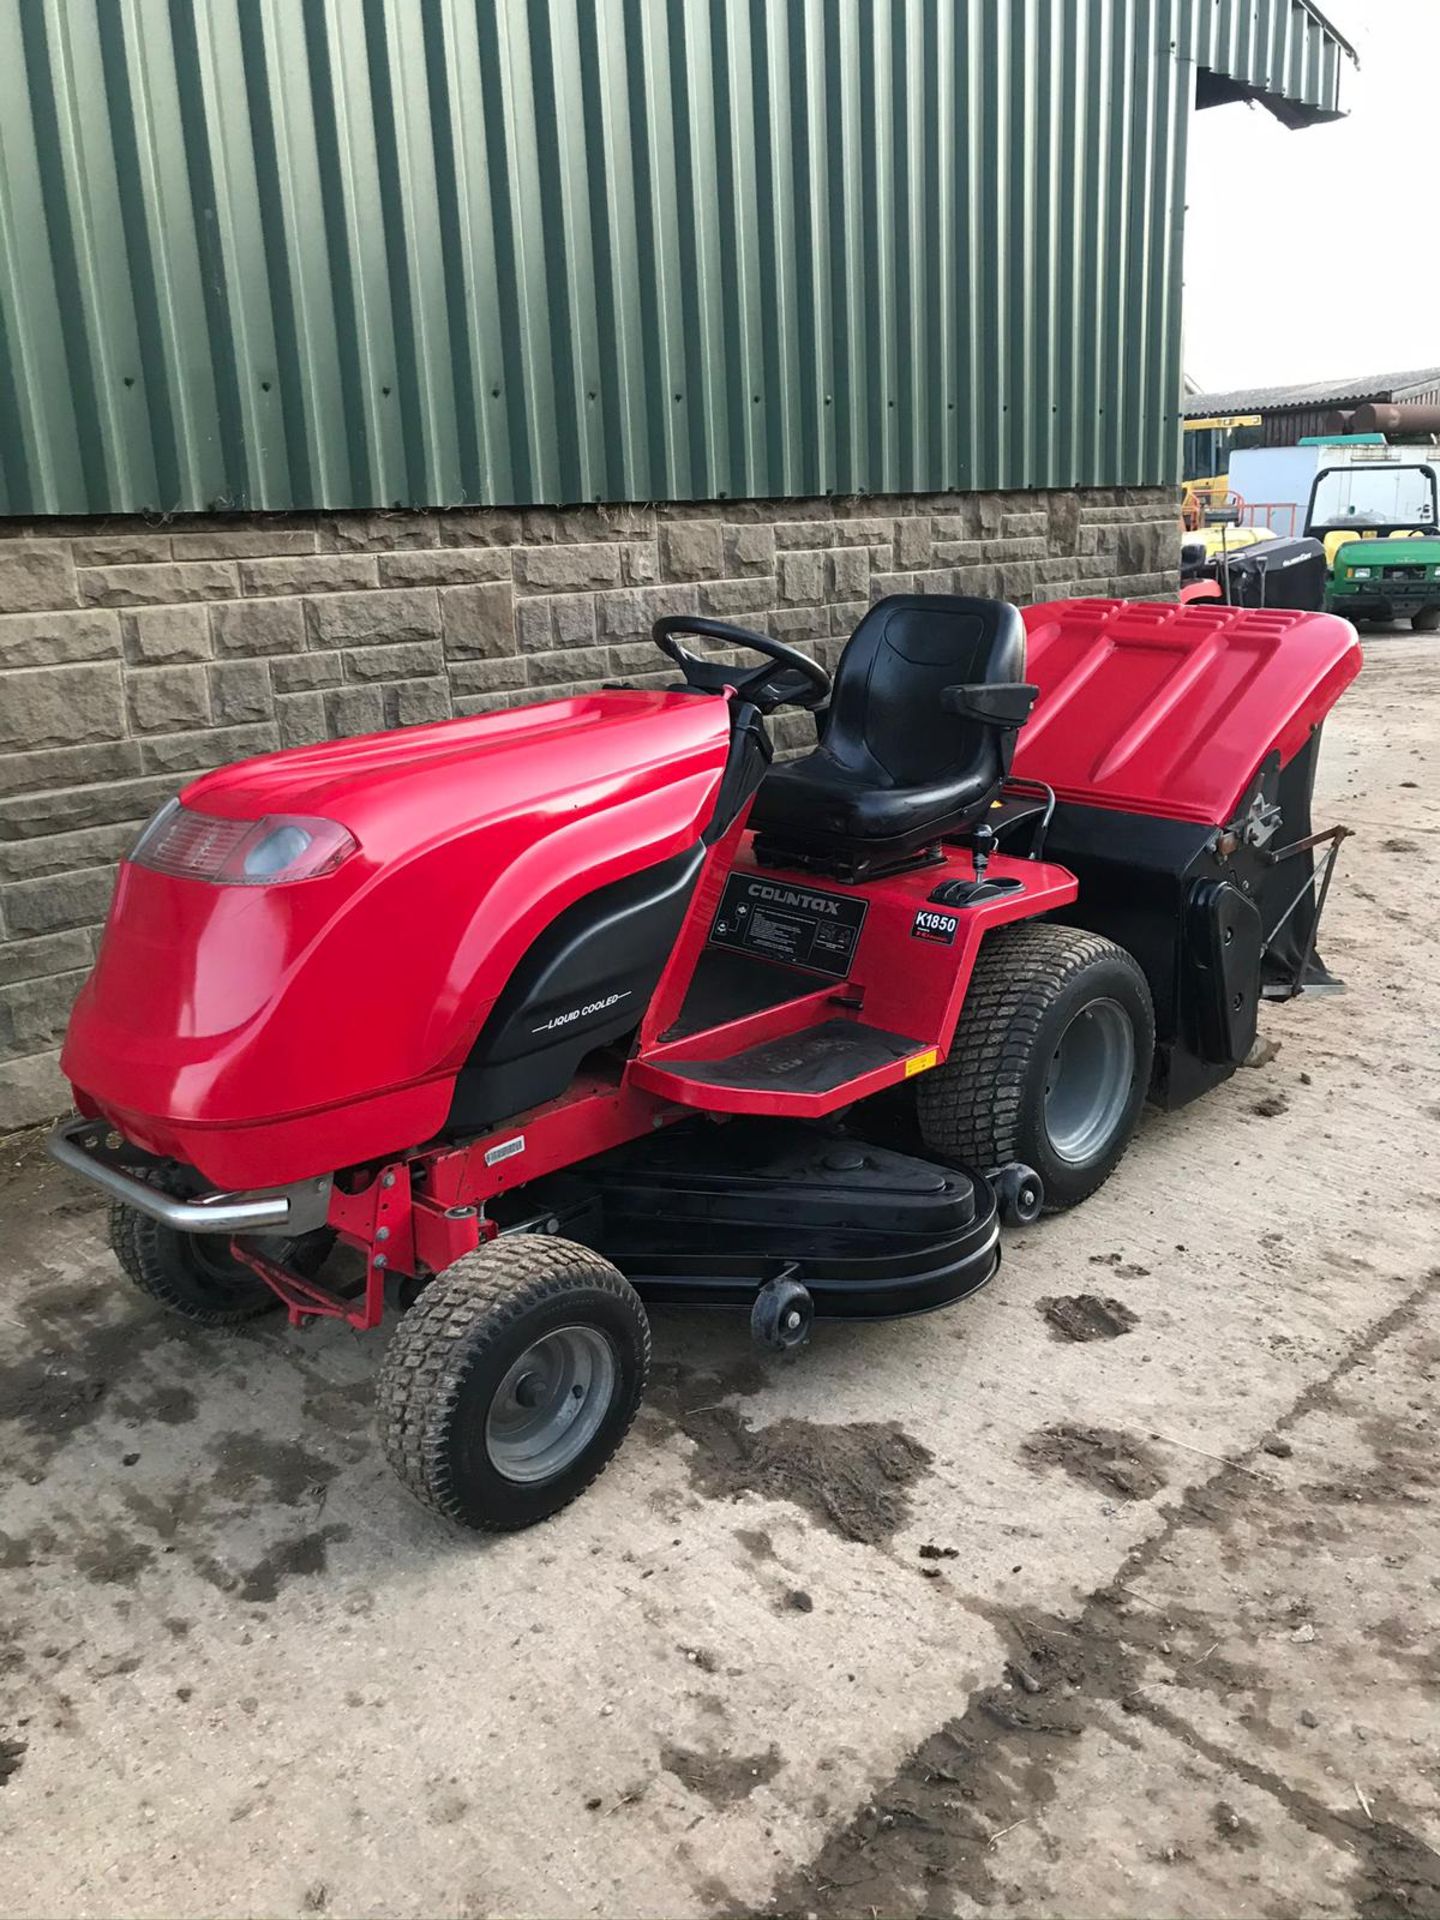 COUNTAX K1850 RIDE ON LAWN MOWER, RUNS, DRIVES AND CUTS, CLEAN MACHINE *NO VAT* - Image 3 of 5